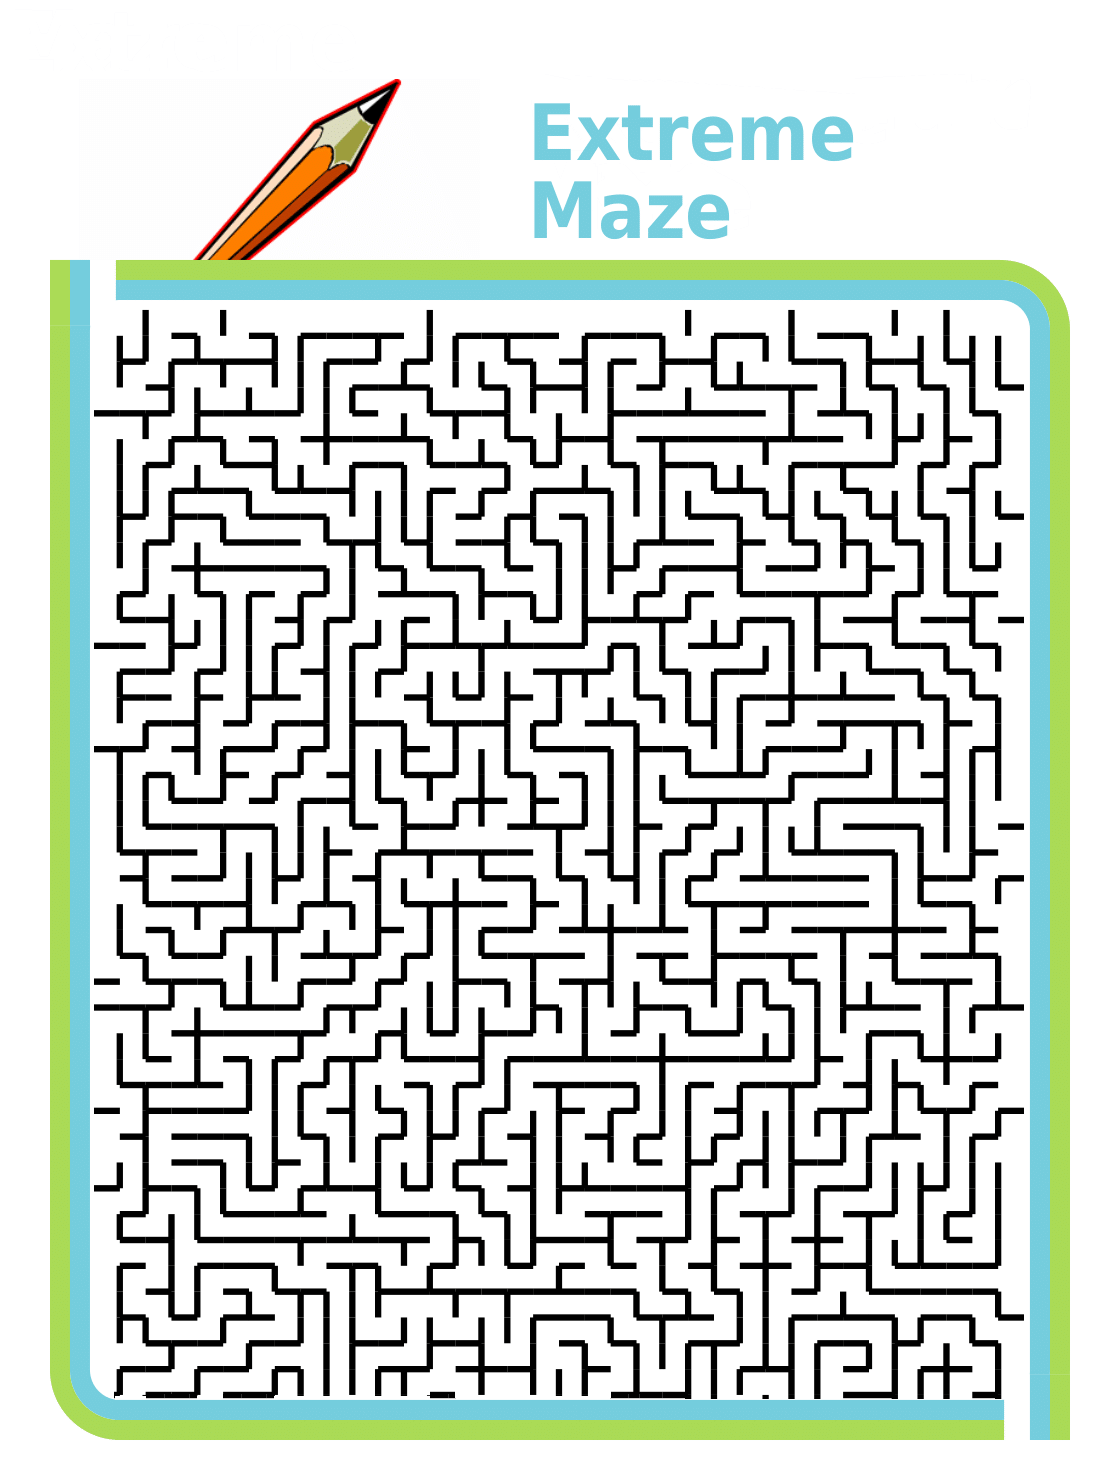 Printable half-sheet maze, difficulty: extreme